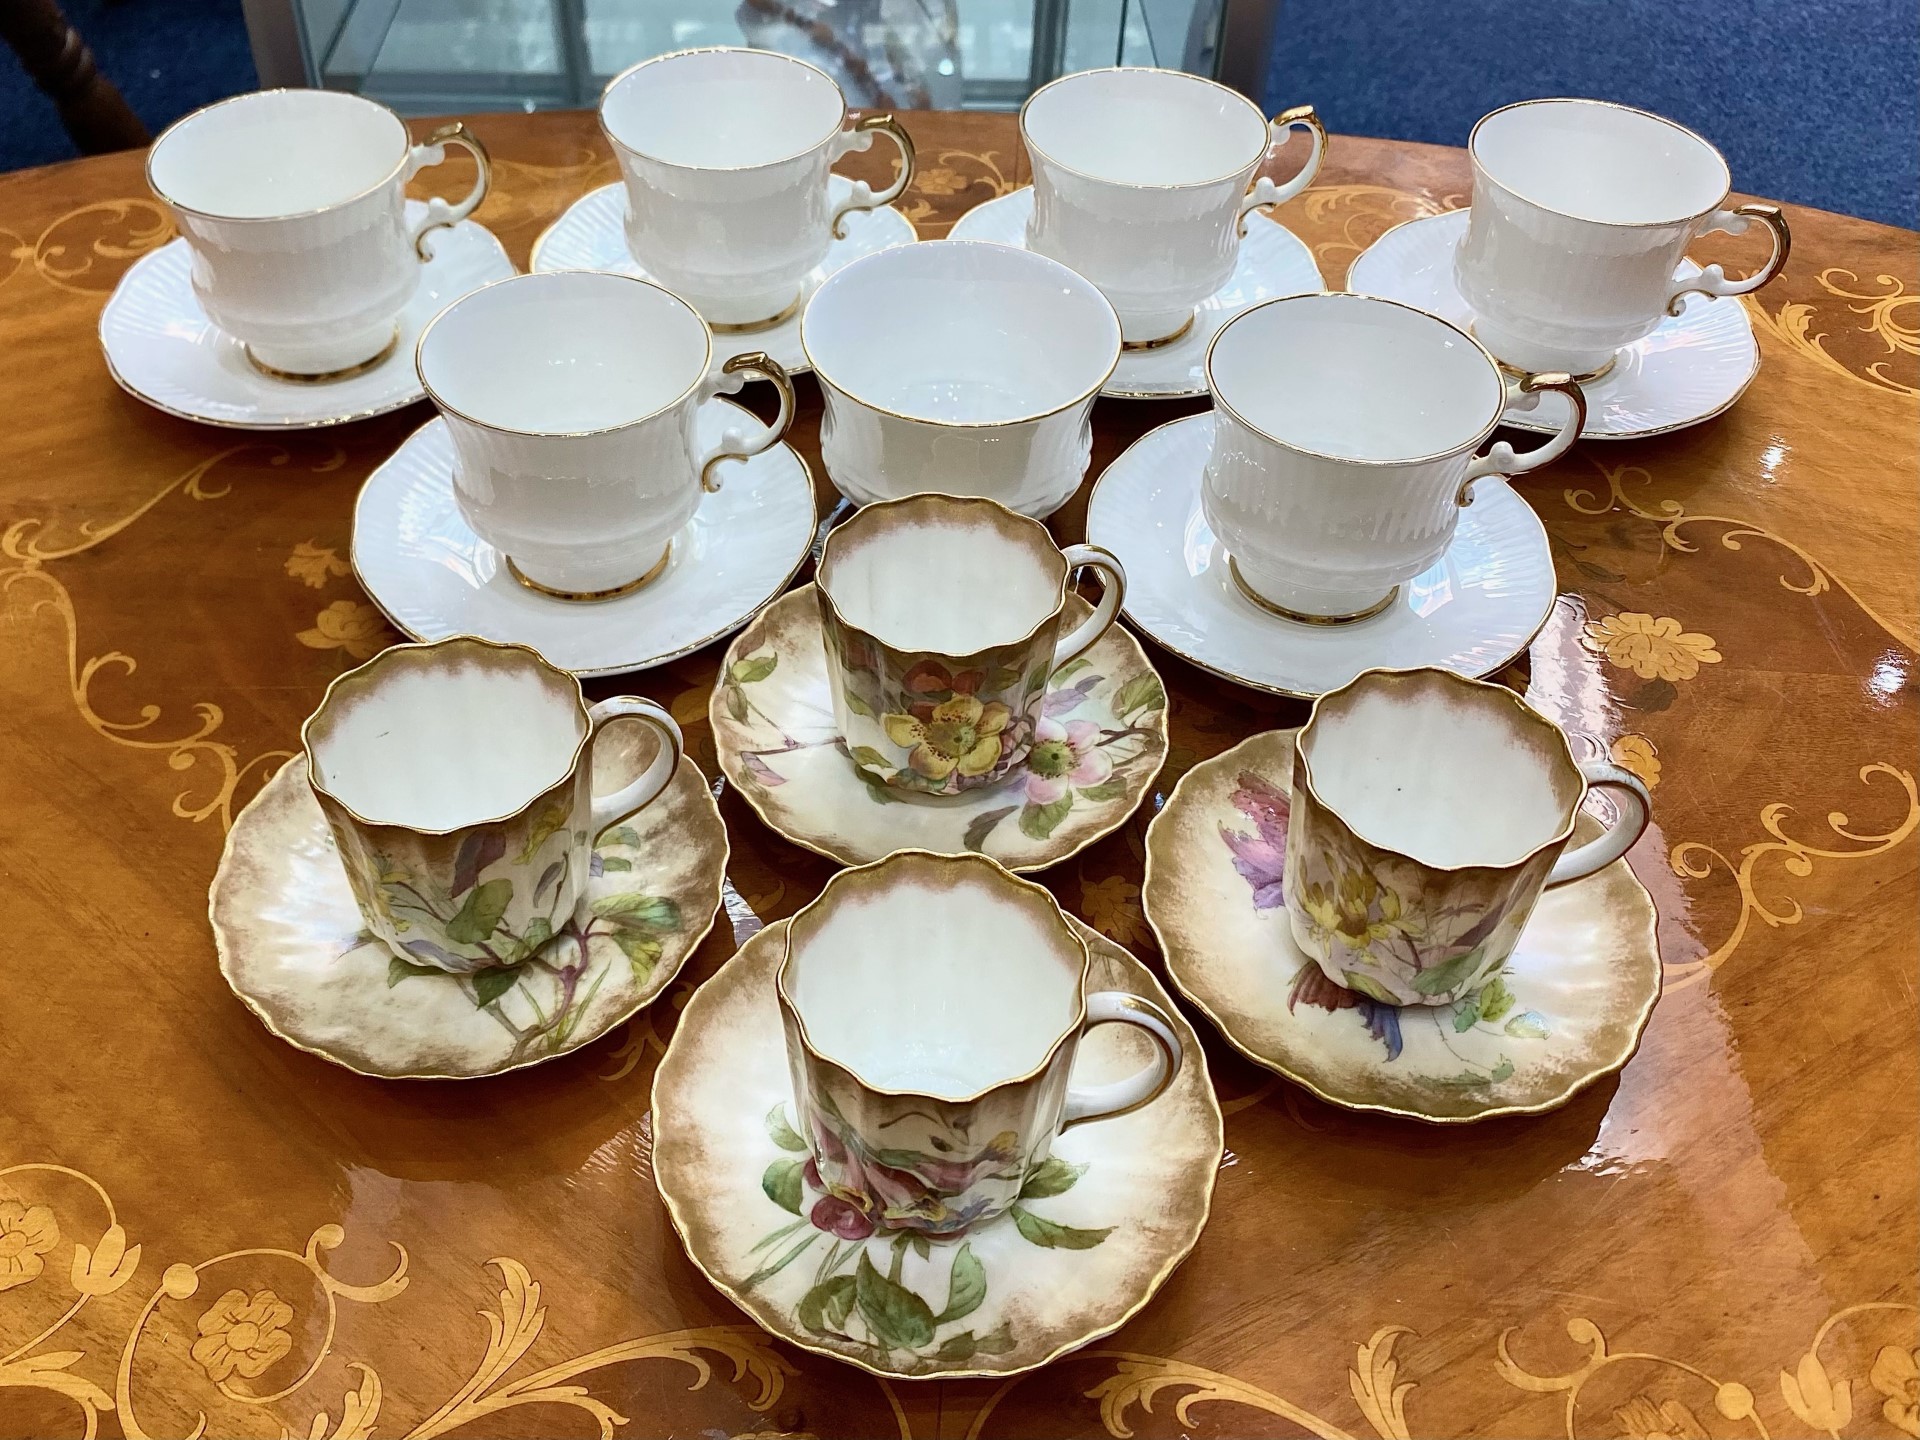 Doulton Burslem Vintage Set comprising four small cups and saucers, decorated with a delicate floral